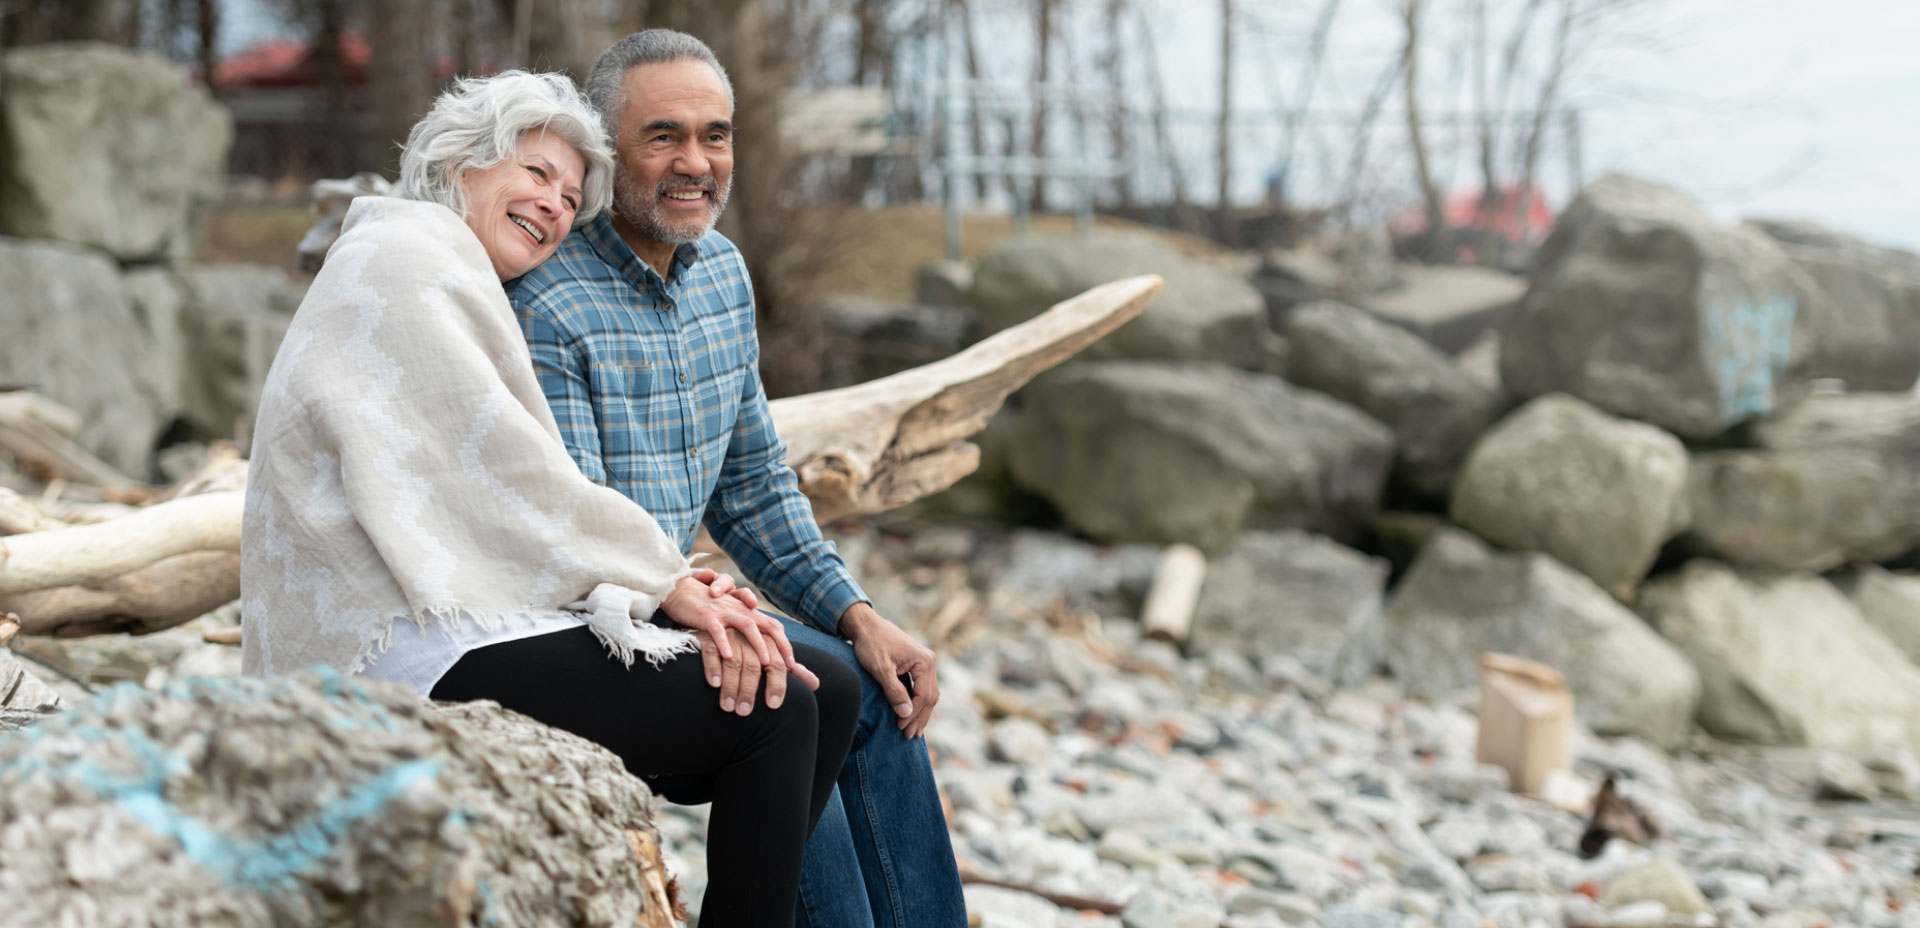 Aged couple shares smiling while sitting together on rocky beach.